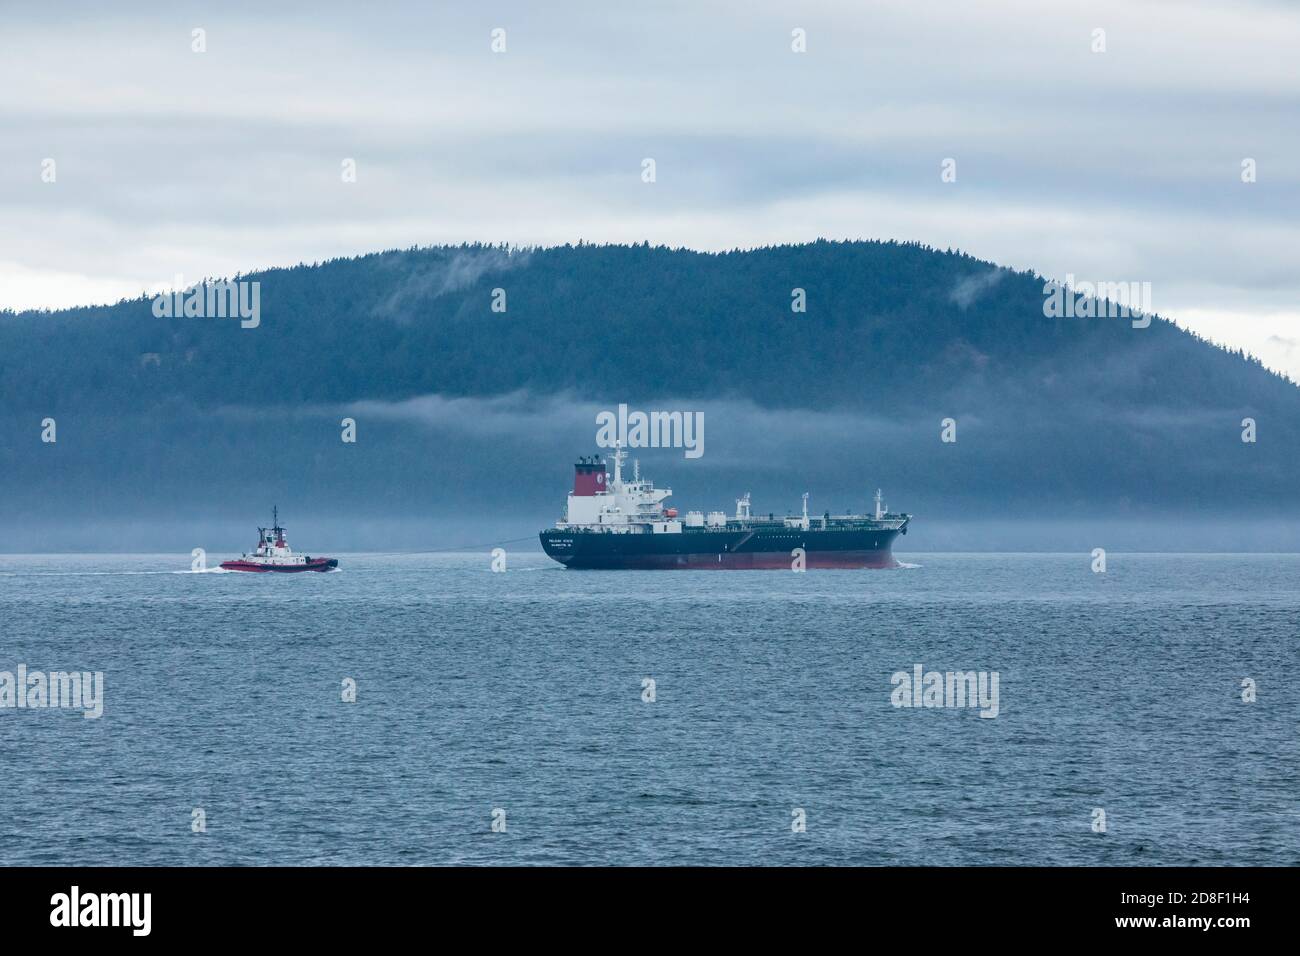 A oil freighter being escorted by a tugboat south of Cypress island in the San Juan Islands on a cloudy day, Rosario Strait, Washington, USA. Stock Photo